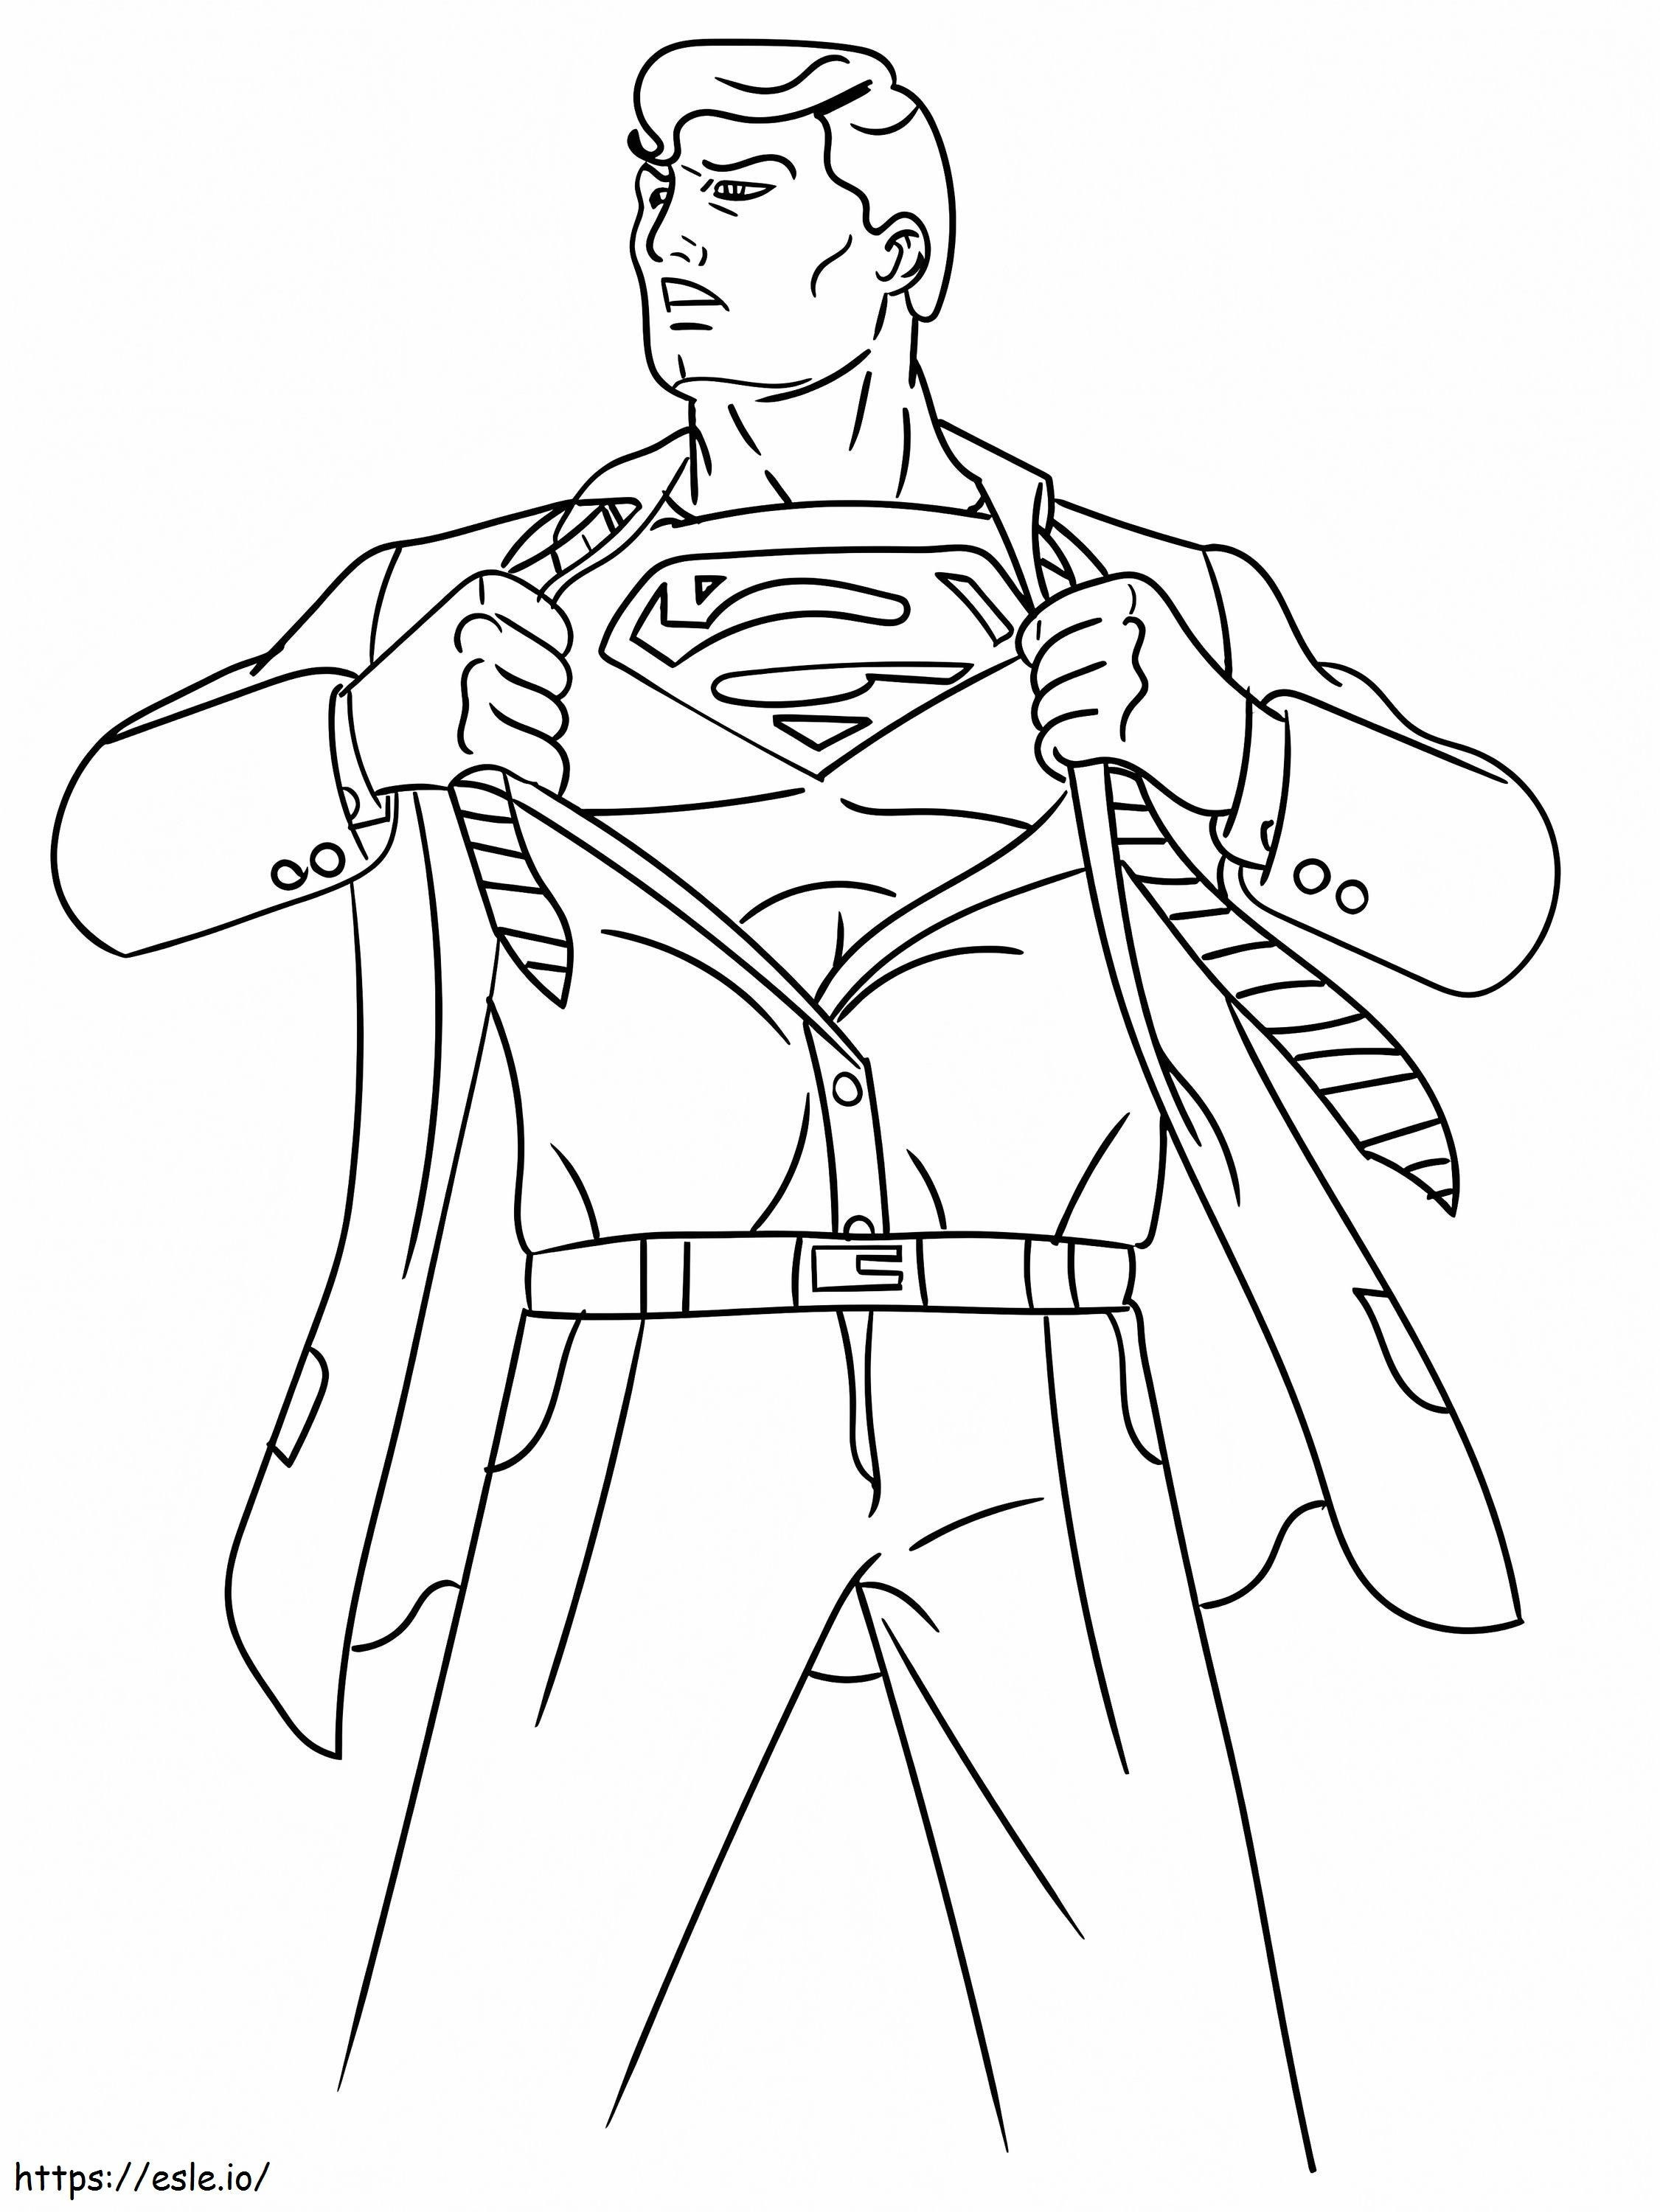 Superman Is Ready coloring page